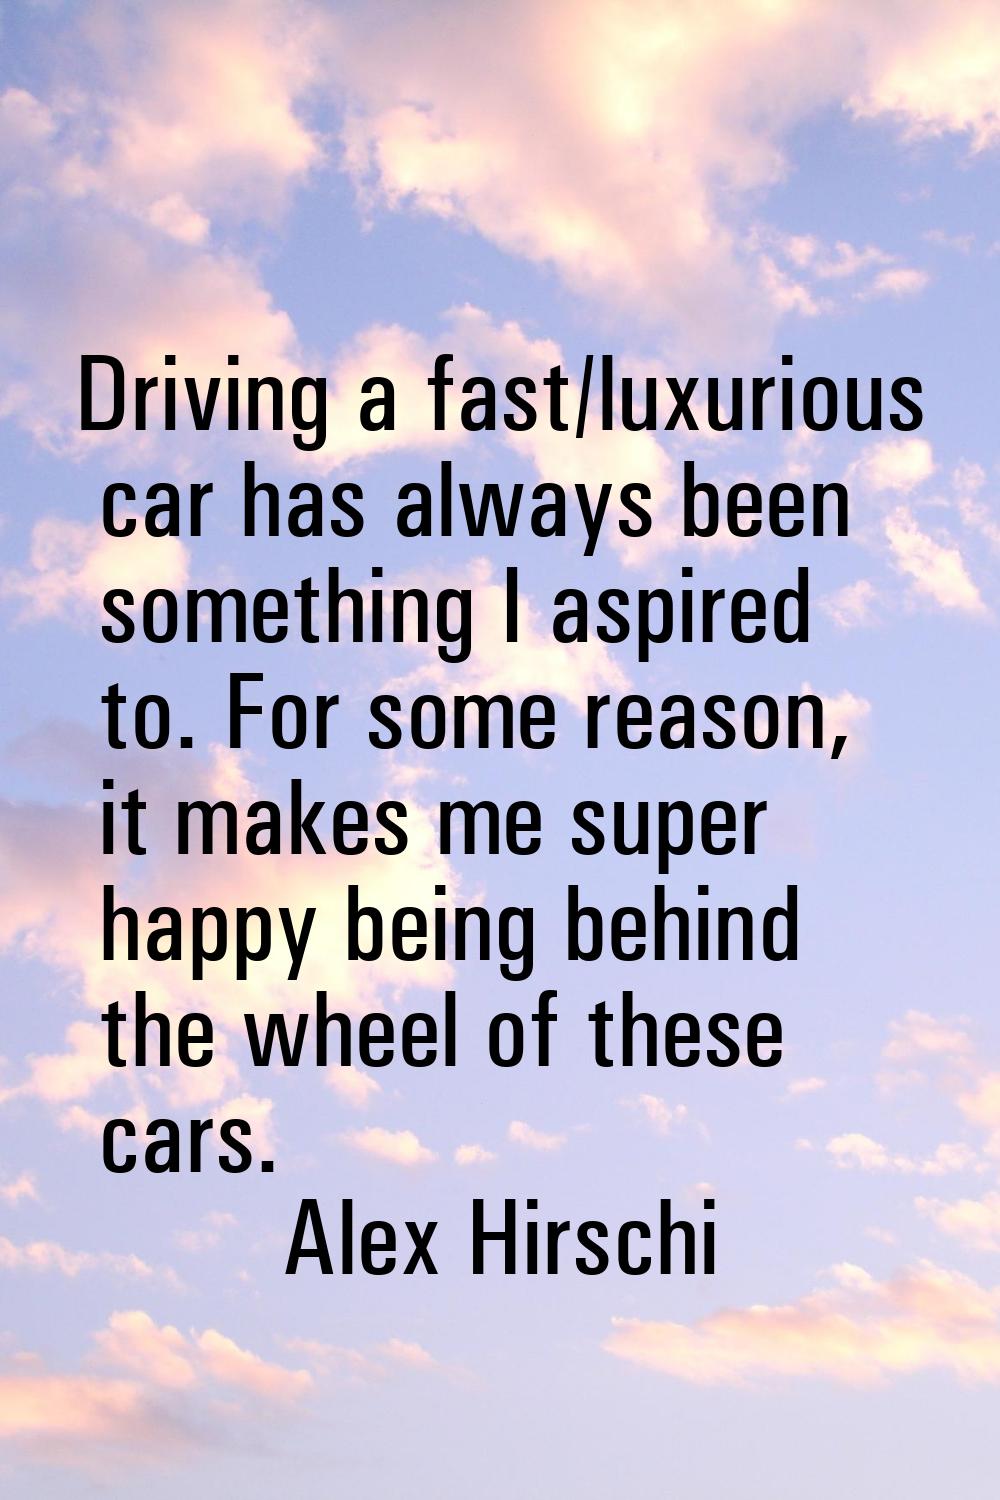 Driving a fast/luxurious car has always been something I aspired to. For some reason, it makes me s